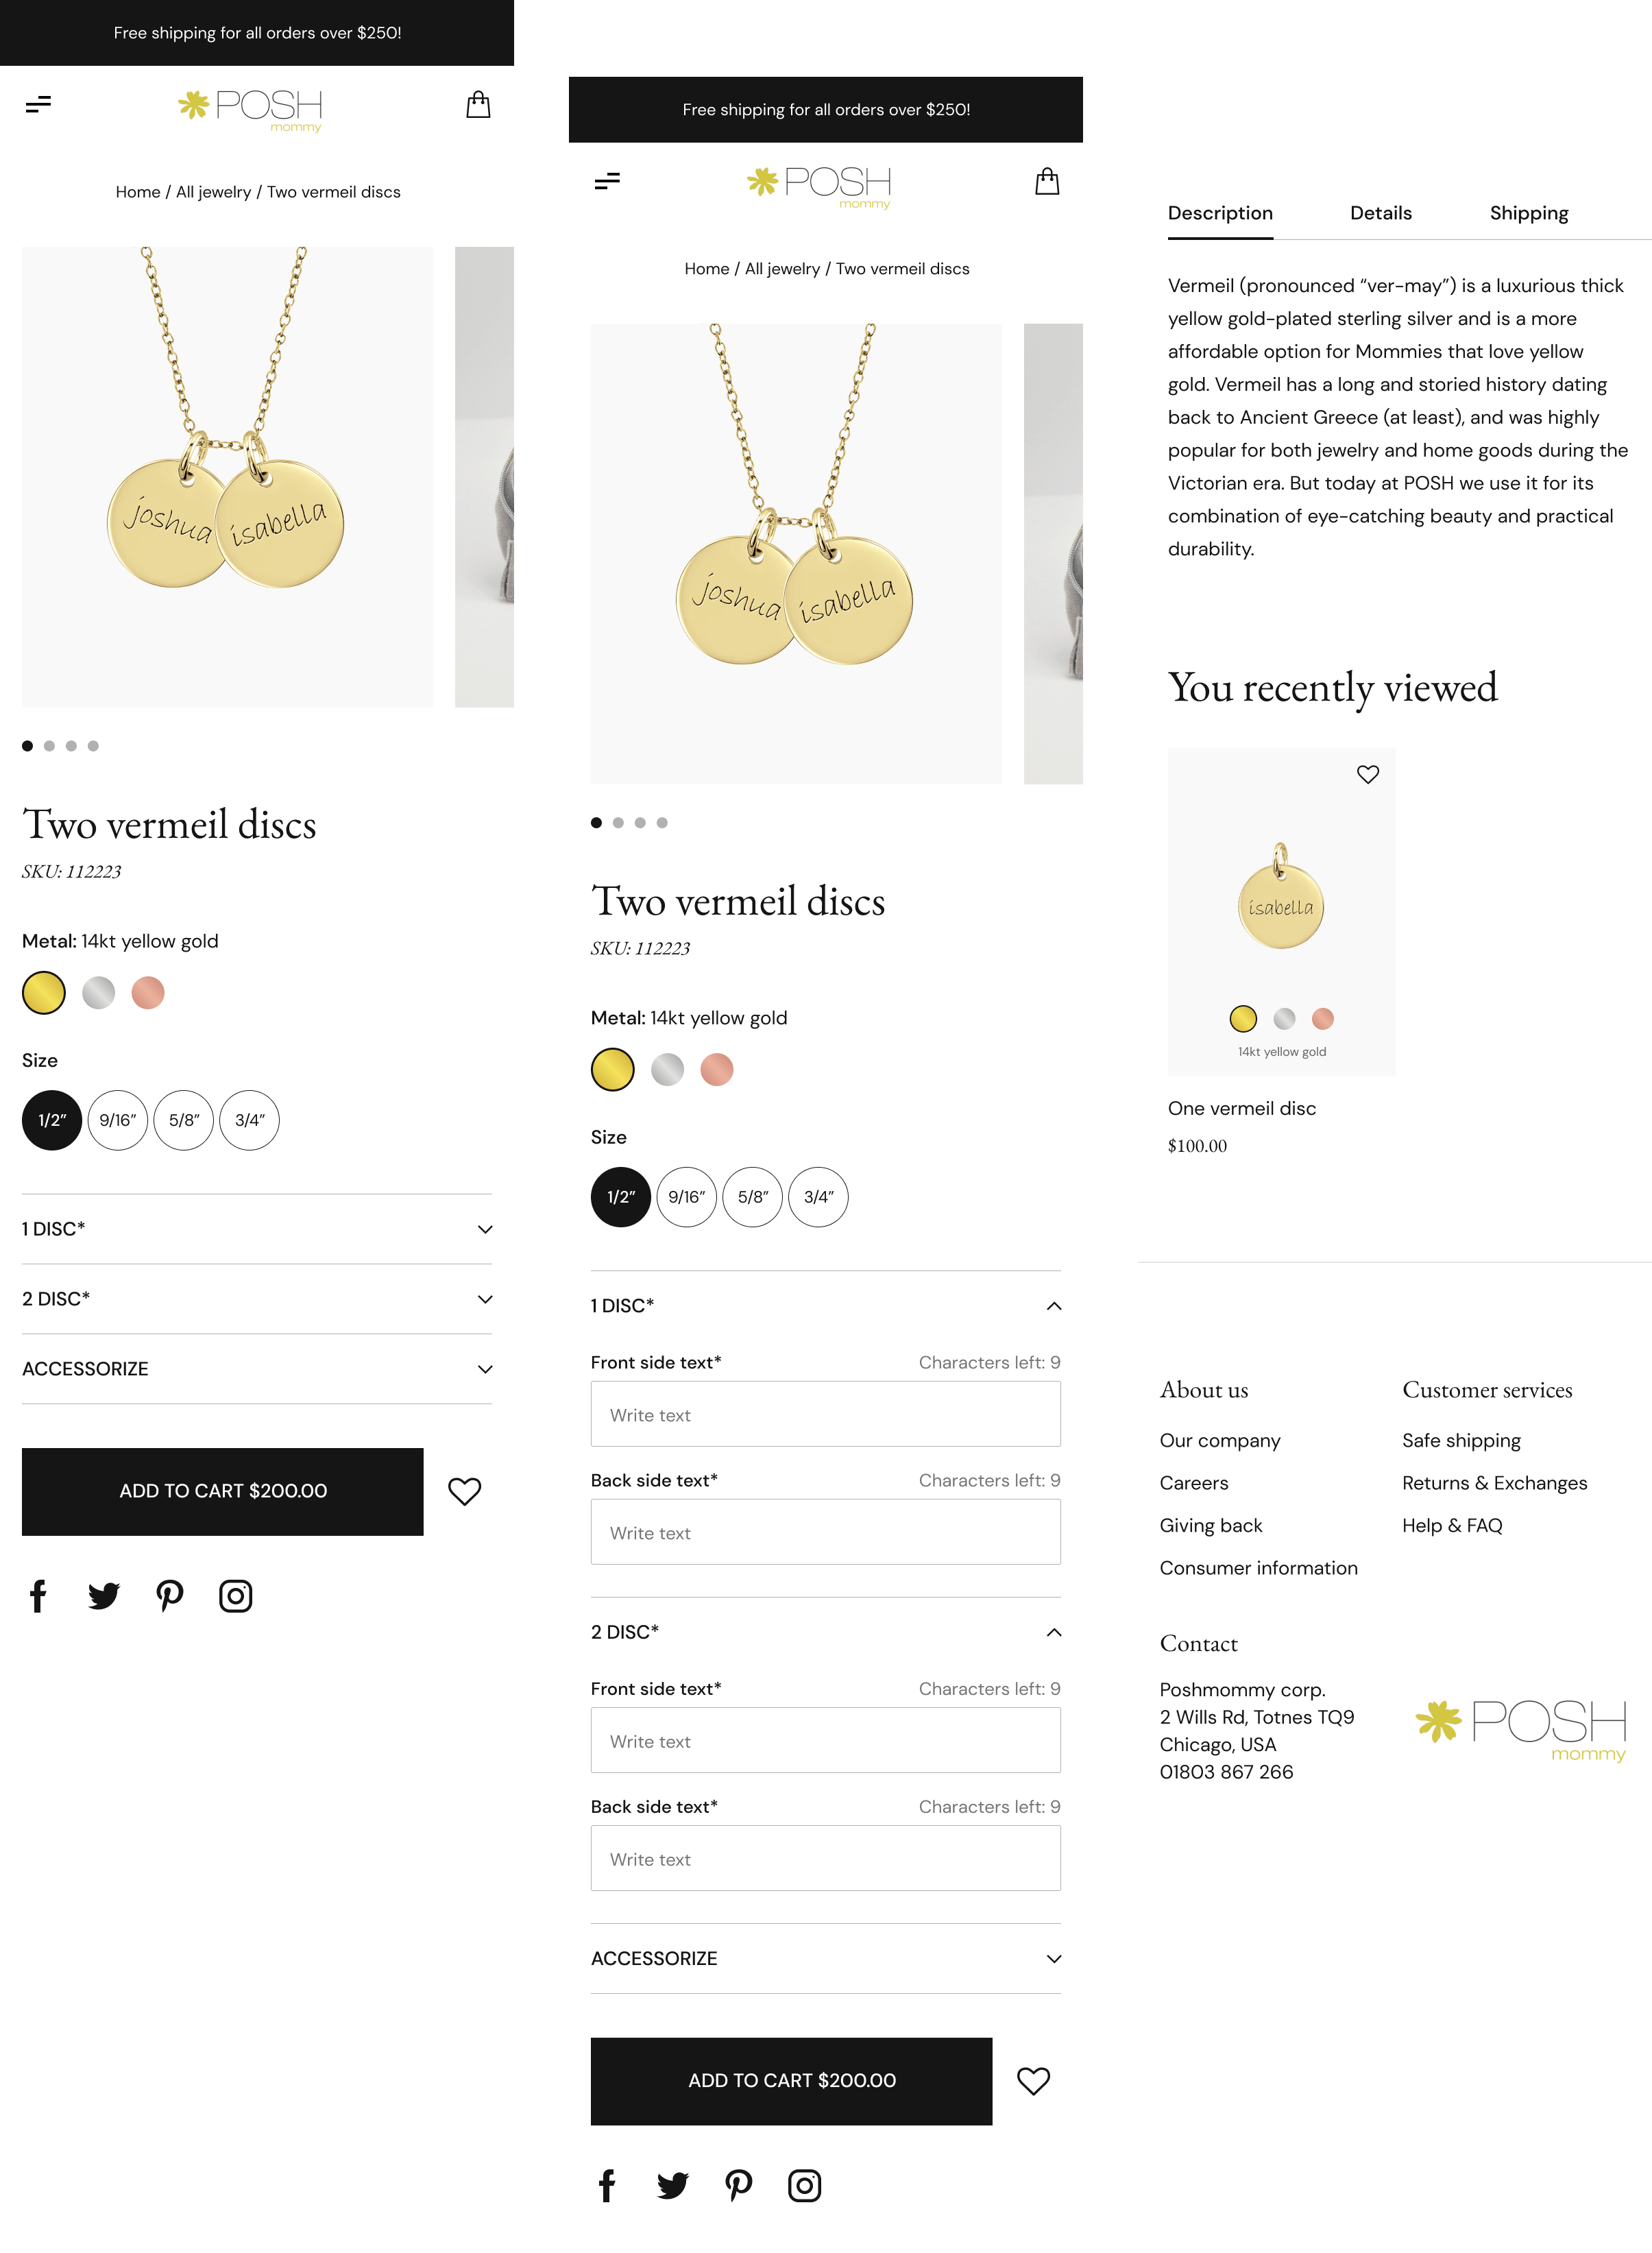 Mobile version of Product page layout